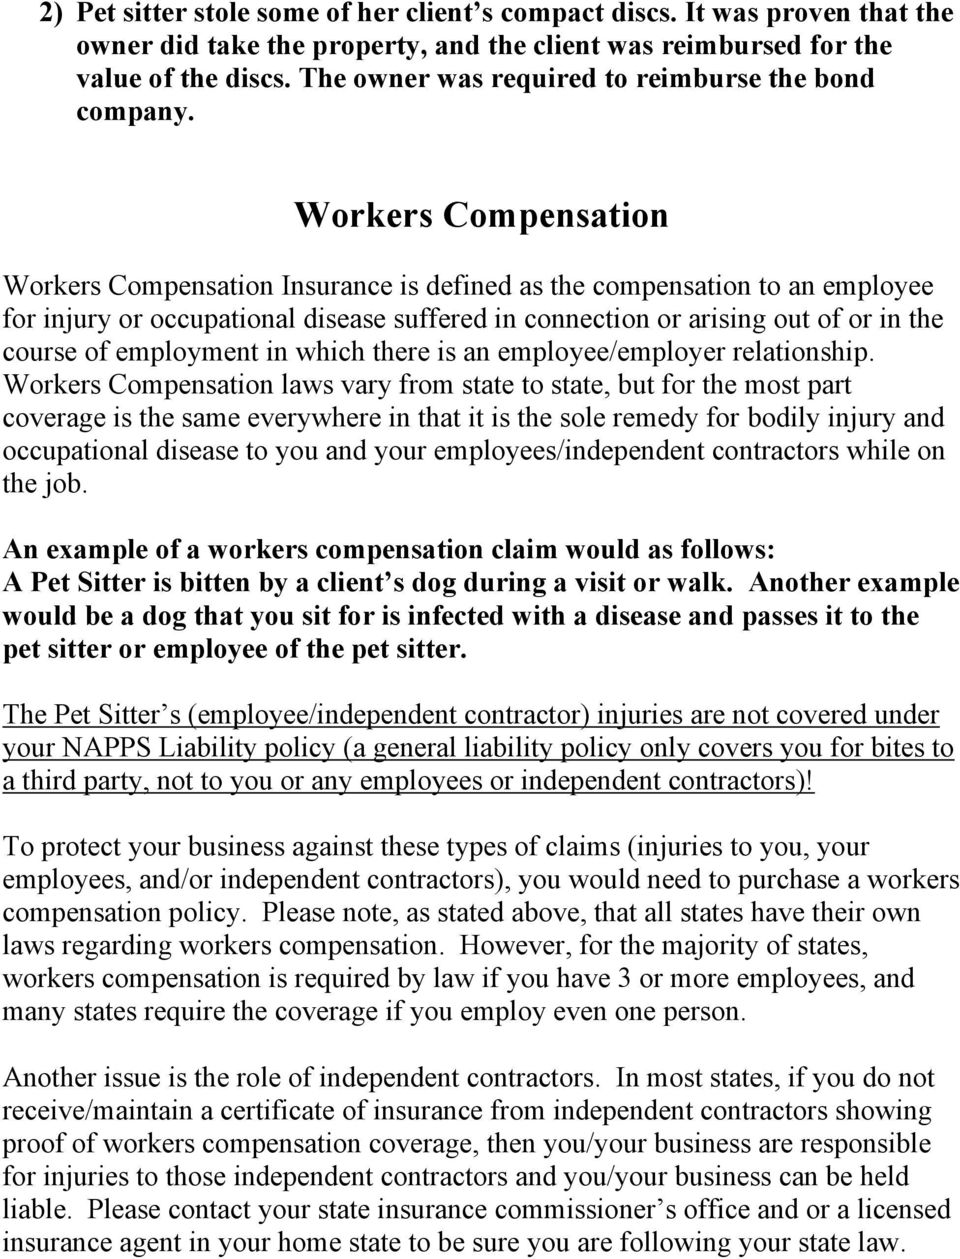 Workers Compensation Workers Compensation Insurance is defined as the compensation to an employee for injury or occupational disease suffered in connection or arising out of or in the course of